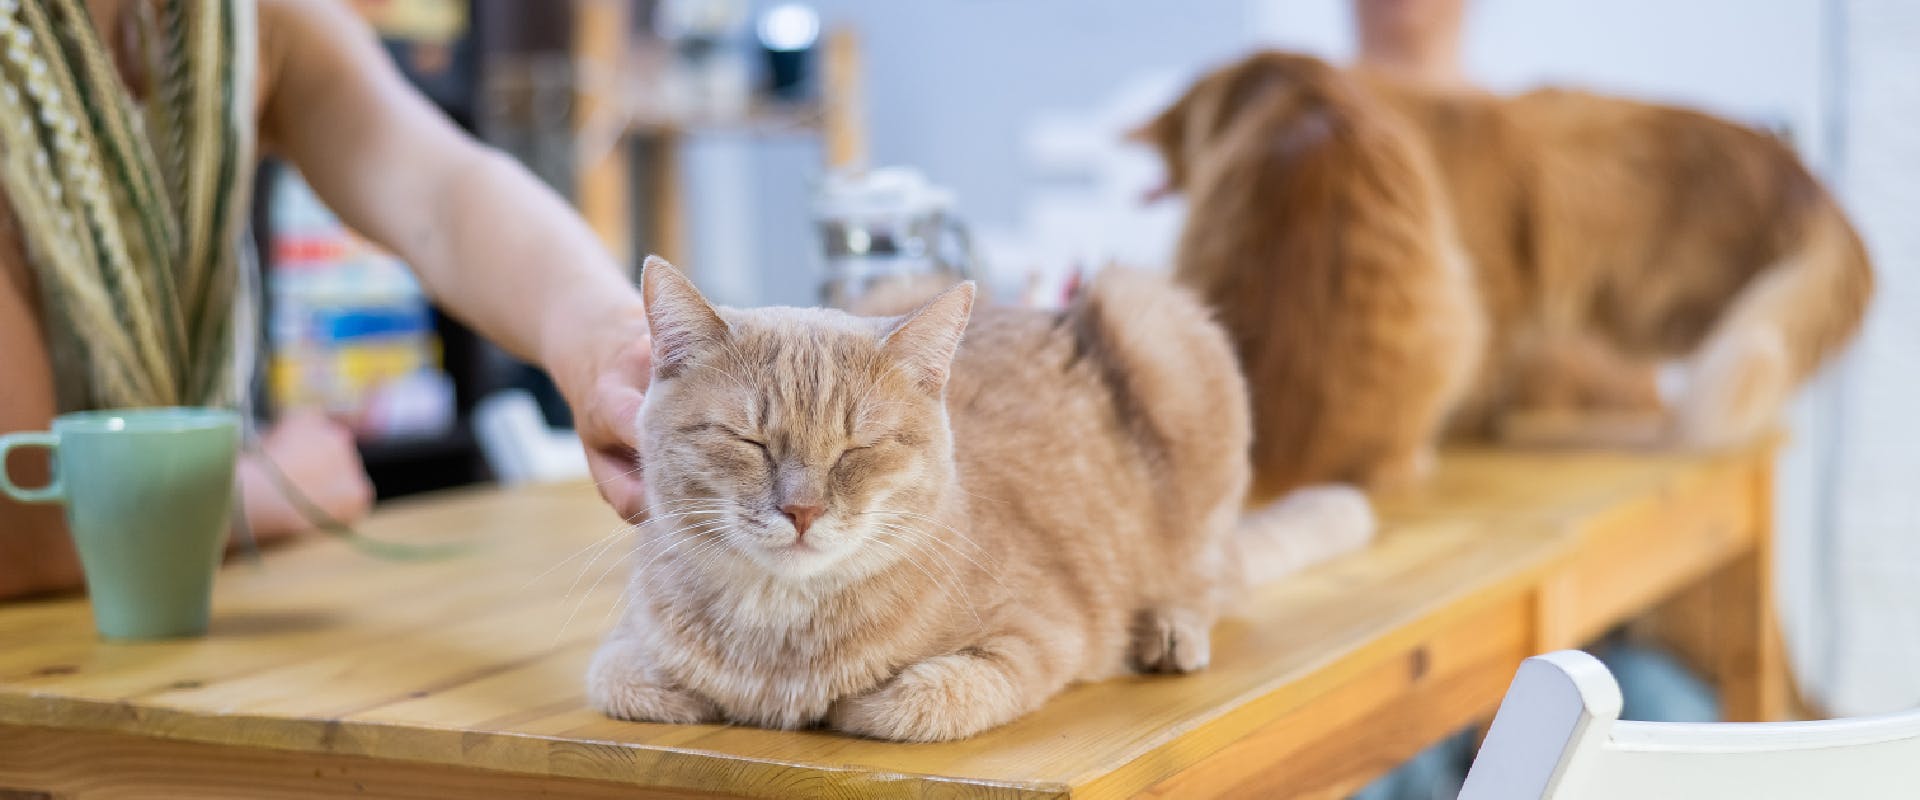 Cats lie on a table in a cat cafe.